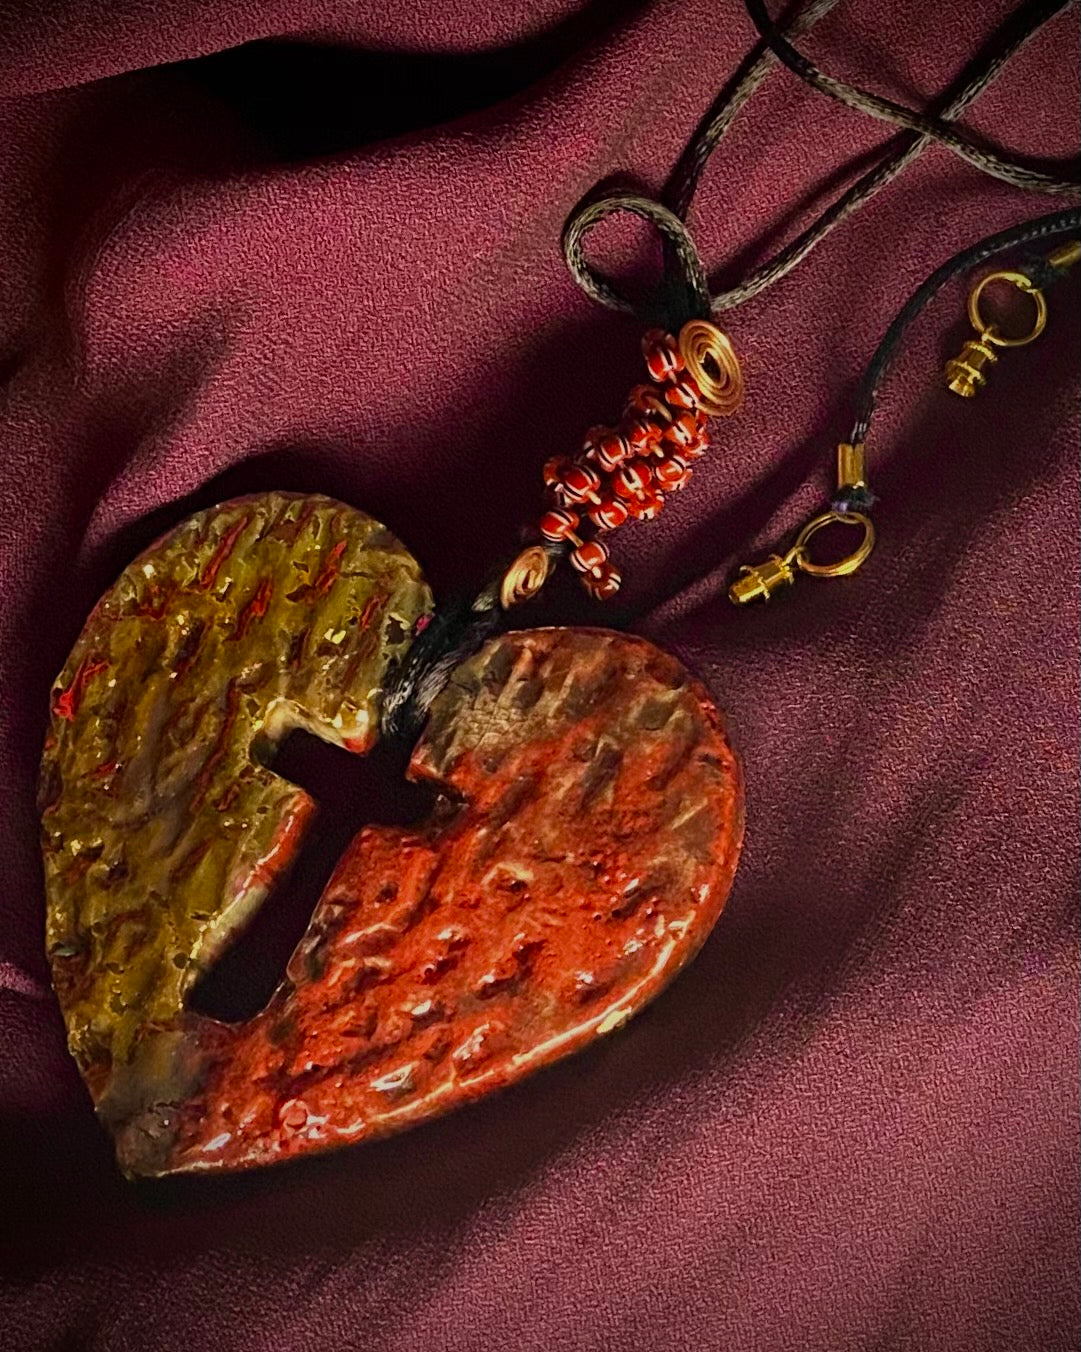 Have A Heart ! Each heart pendant is handmade with love! It is 3"x 3" and weighs approx. 3ozs. This pendant has a red and gold metallic raku glazes that renders a unique translucent  patina. The heart is textured and has a cut out cross in the center. It holds a spiral of red and white mini beads on a spiral copper wire. This pendant has a nice 12" black suede cord!